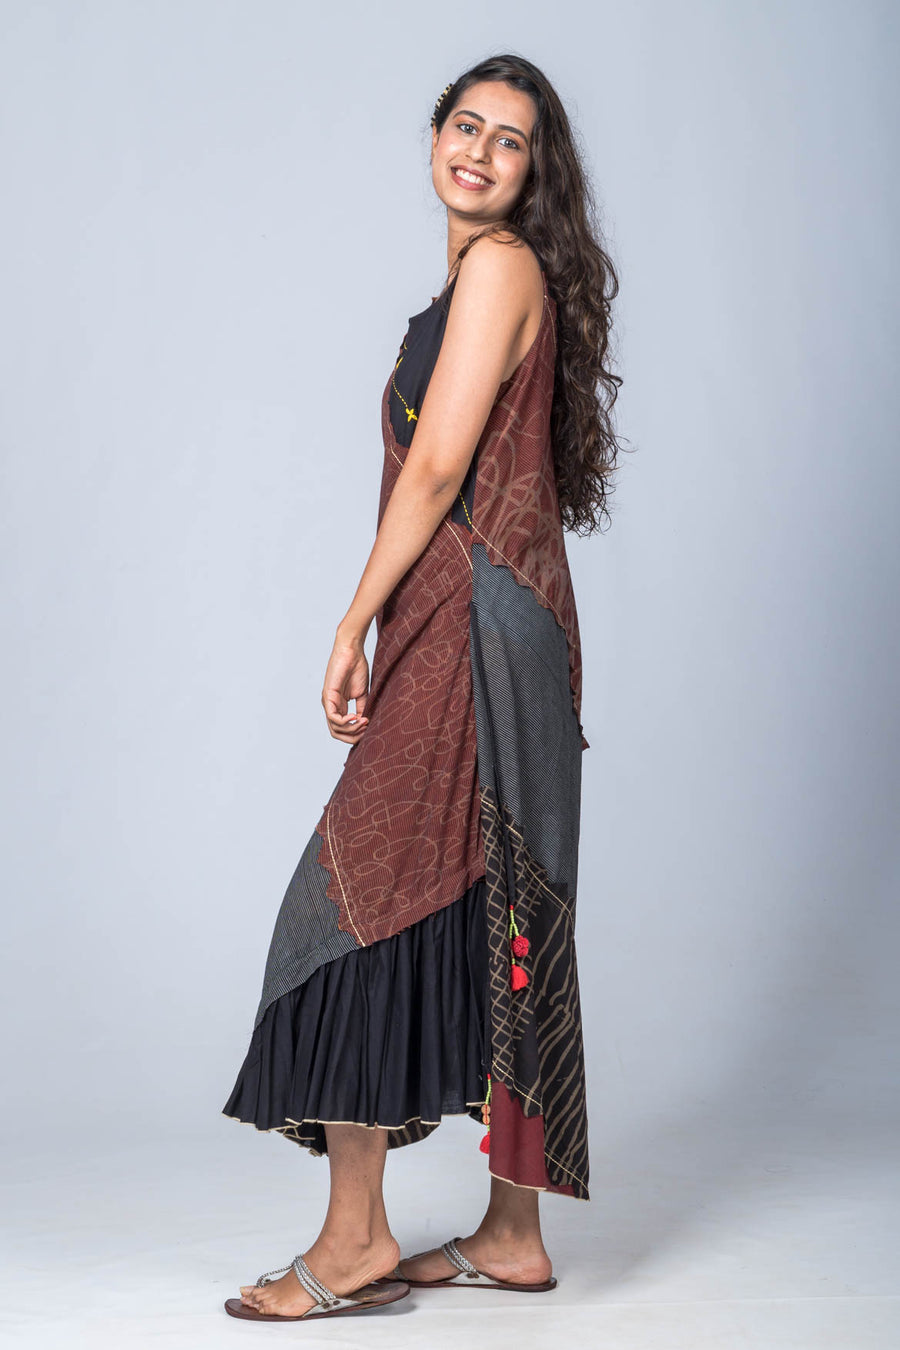 Aarnavi-Upcycled Organic Cotton Maroon and Black Dress